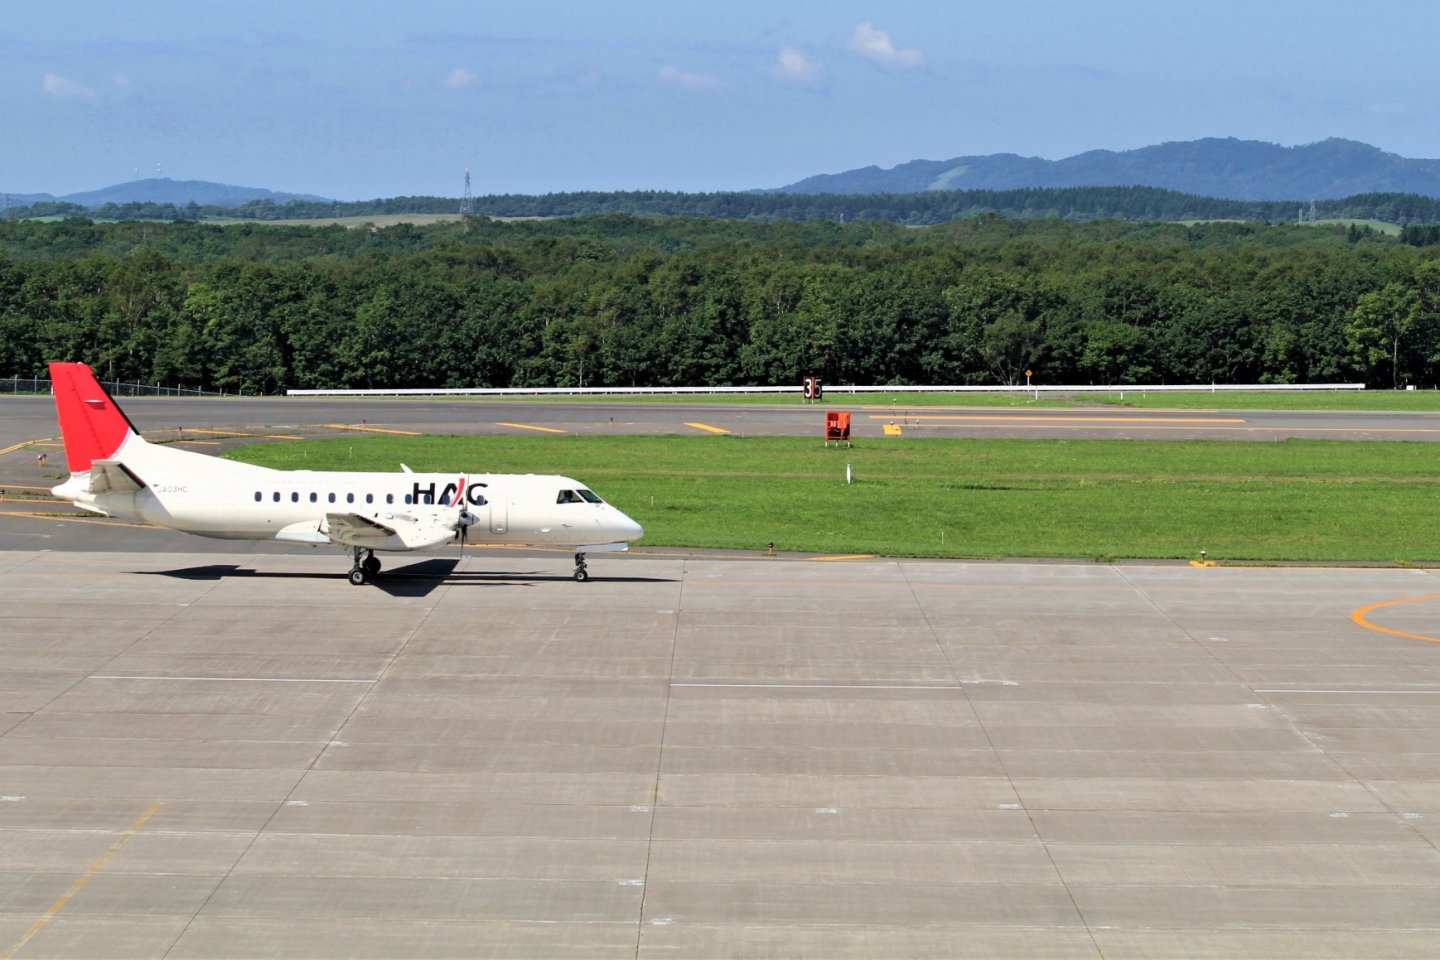 Kushiro Airport is well served with smaller regional aircraft such as this Hokkaido Air System Saab 340B